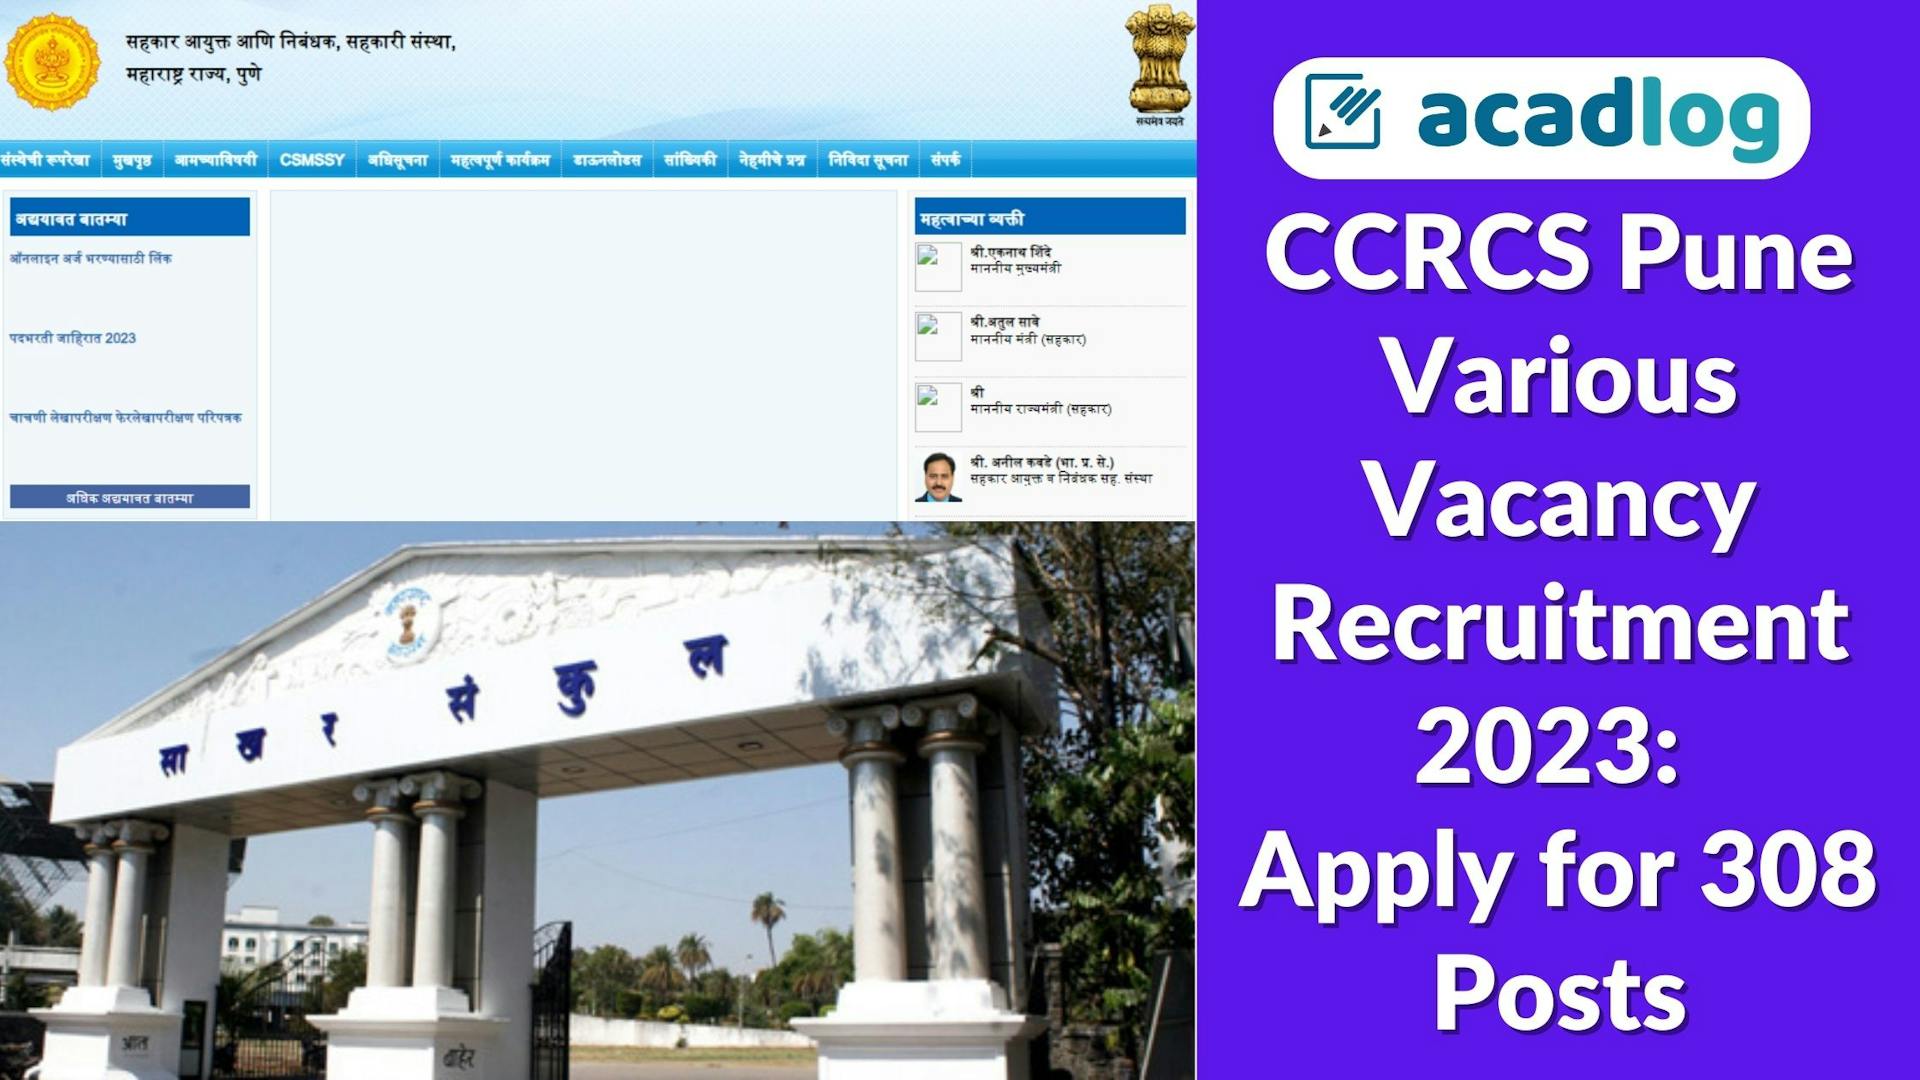 CCRCS Pune Various Vacancy Recruitment 2023: Apply for 308 Posts